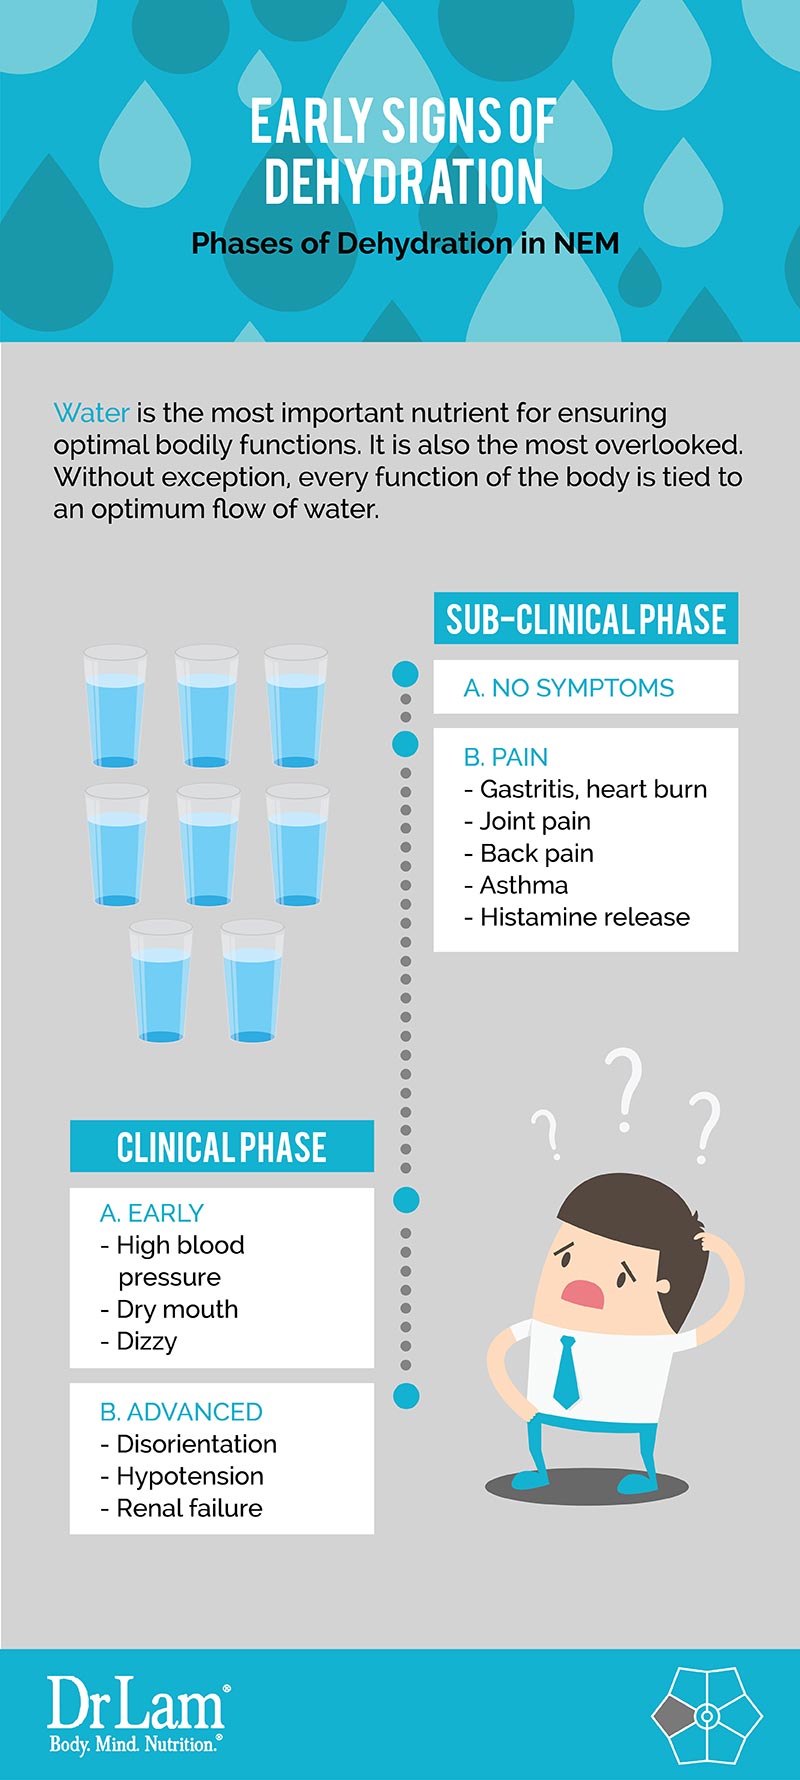 Check out this easy to understand infographic about the early signs of dehydration